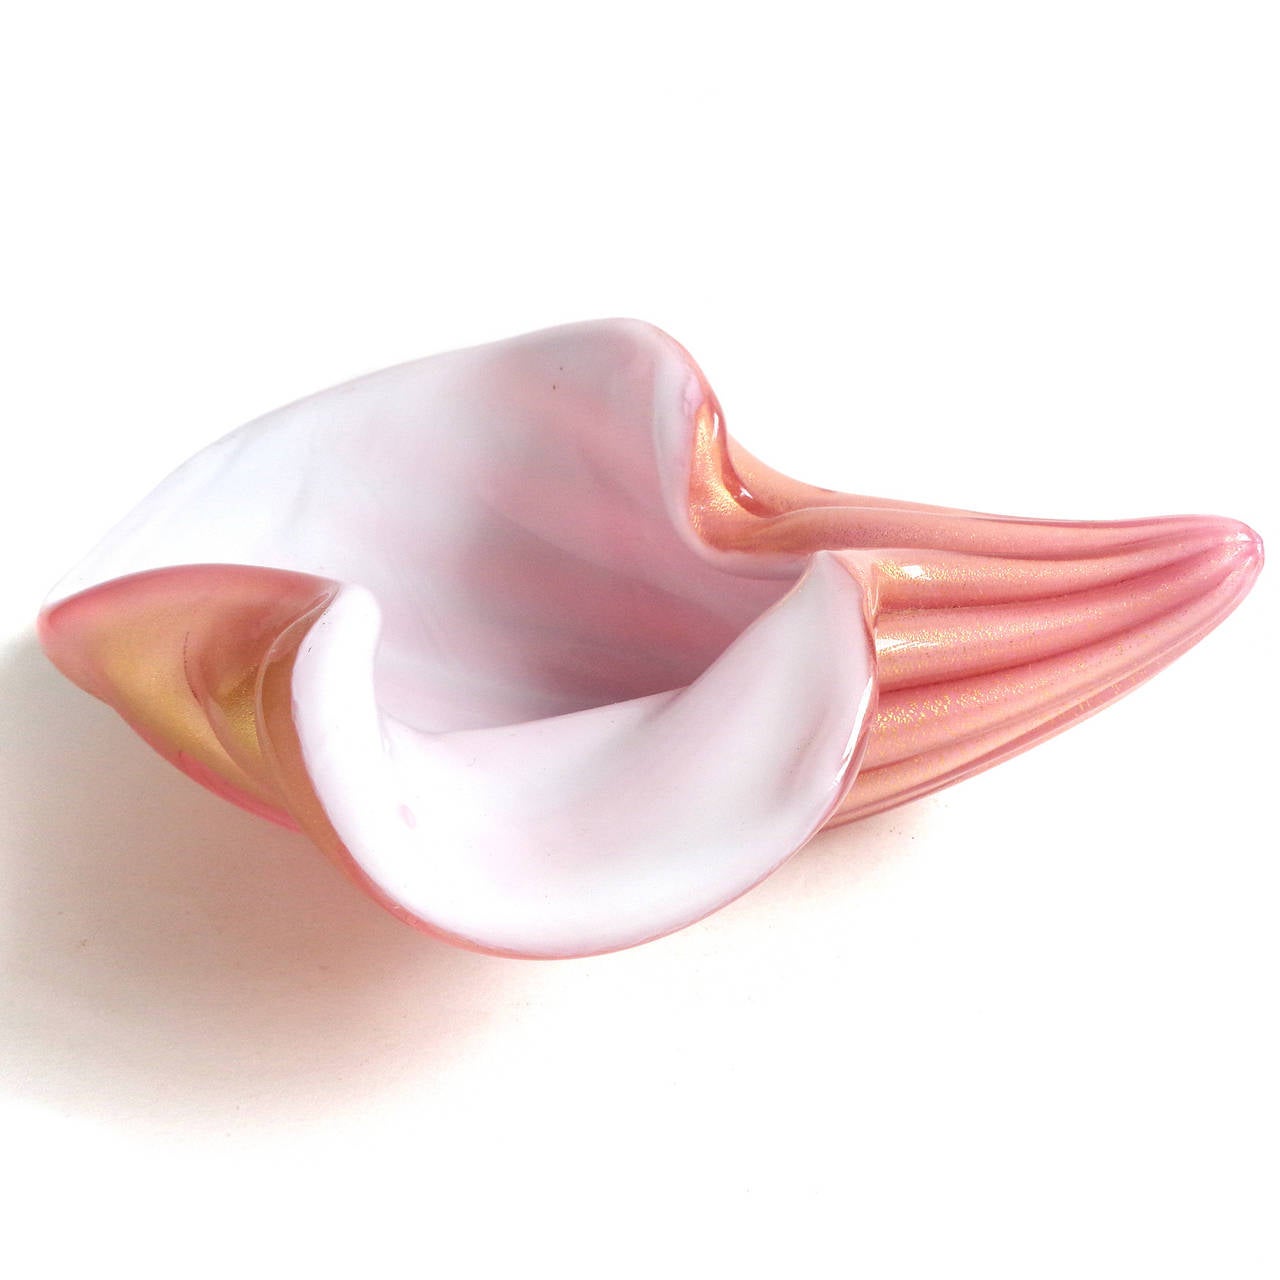 Free shipping worldwide! See details below description.

Gorgeous Murano handblown pink over white and gold flecks art glass conch shell bowl. Attributed to designer Alfredo Barbini. The piece has a ribbed body, with heavy gold leaf throughout.